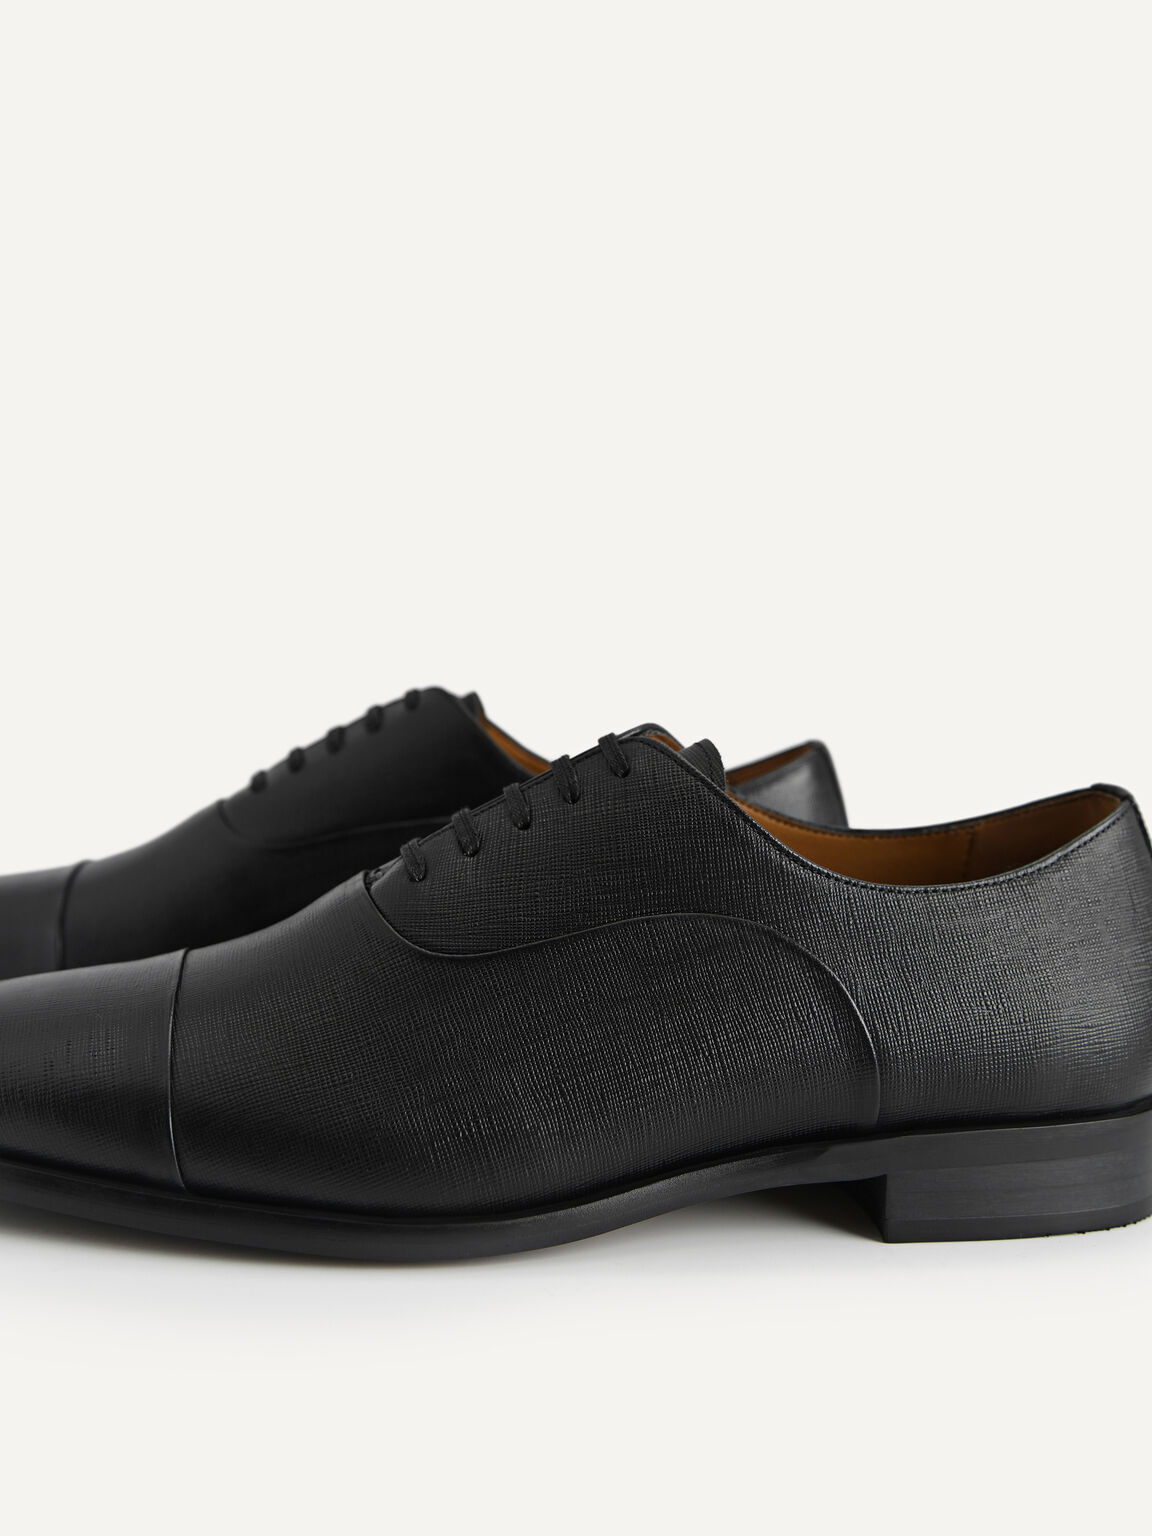 Textured Leather Oxford Shoes, Black, hi-res